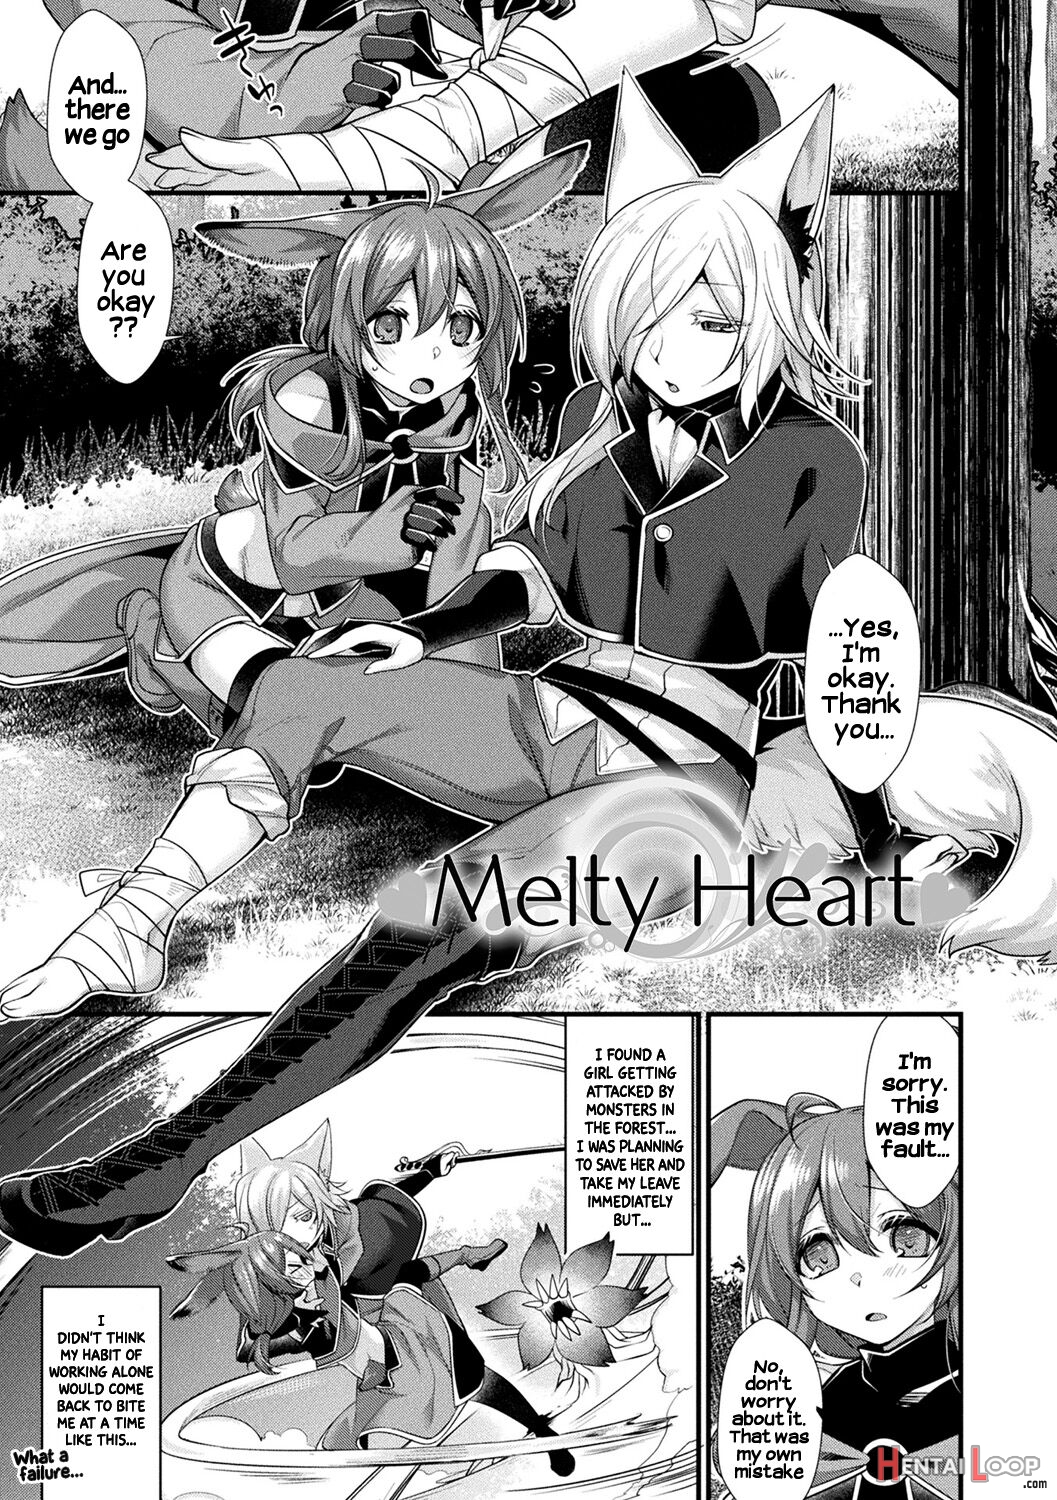 Melty Heart page 1